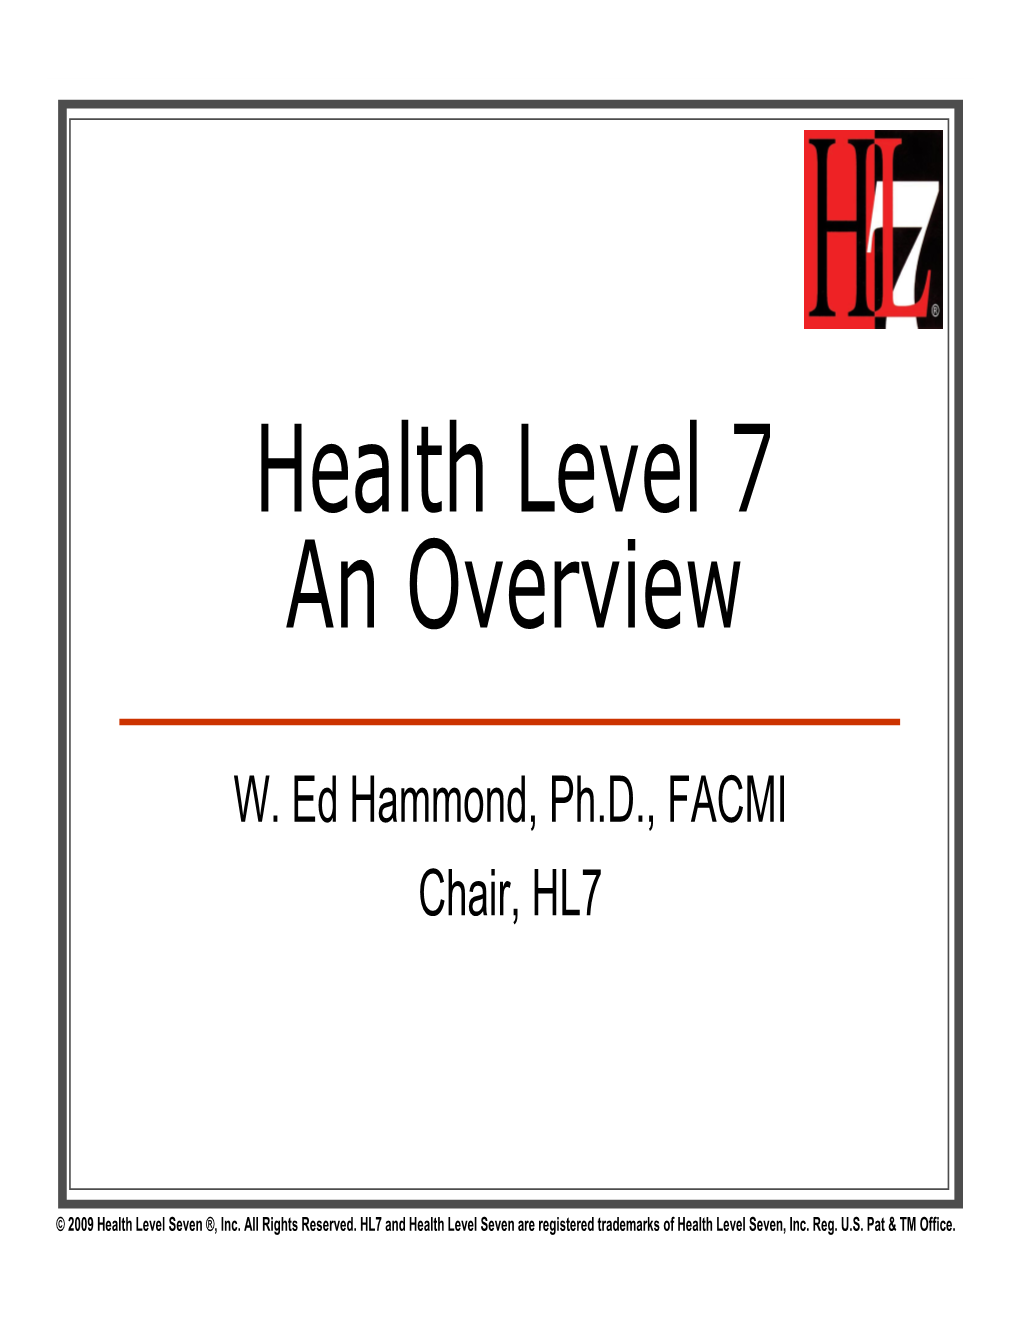 Health Level 7 an Overview